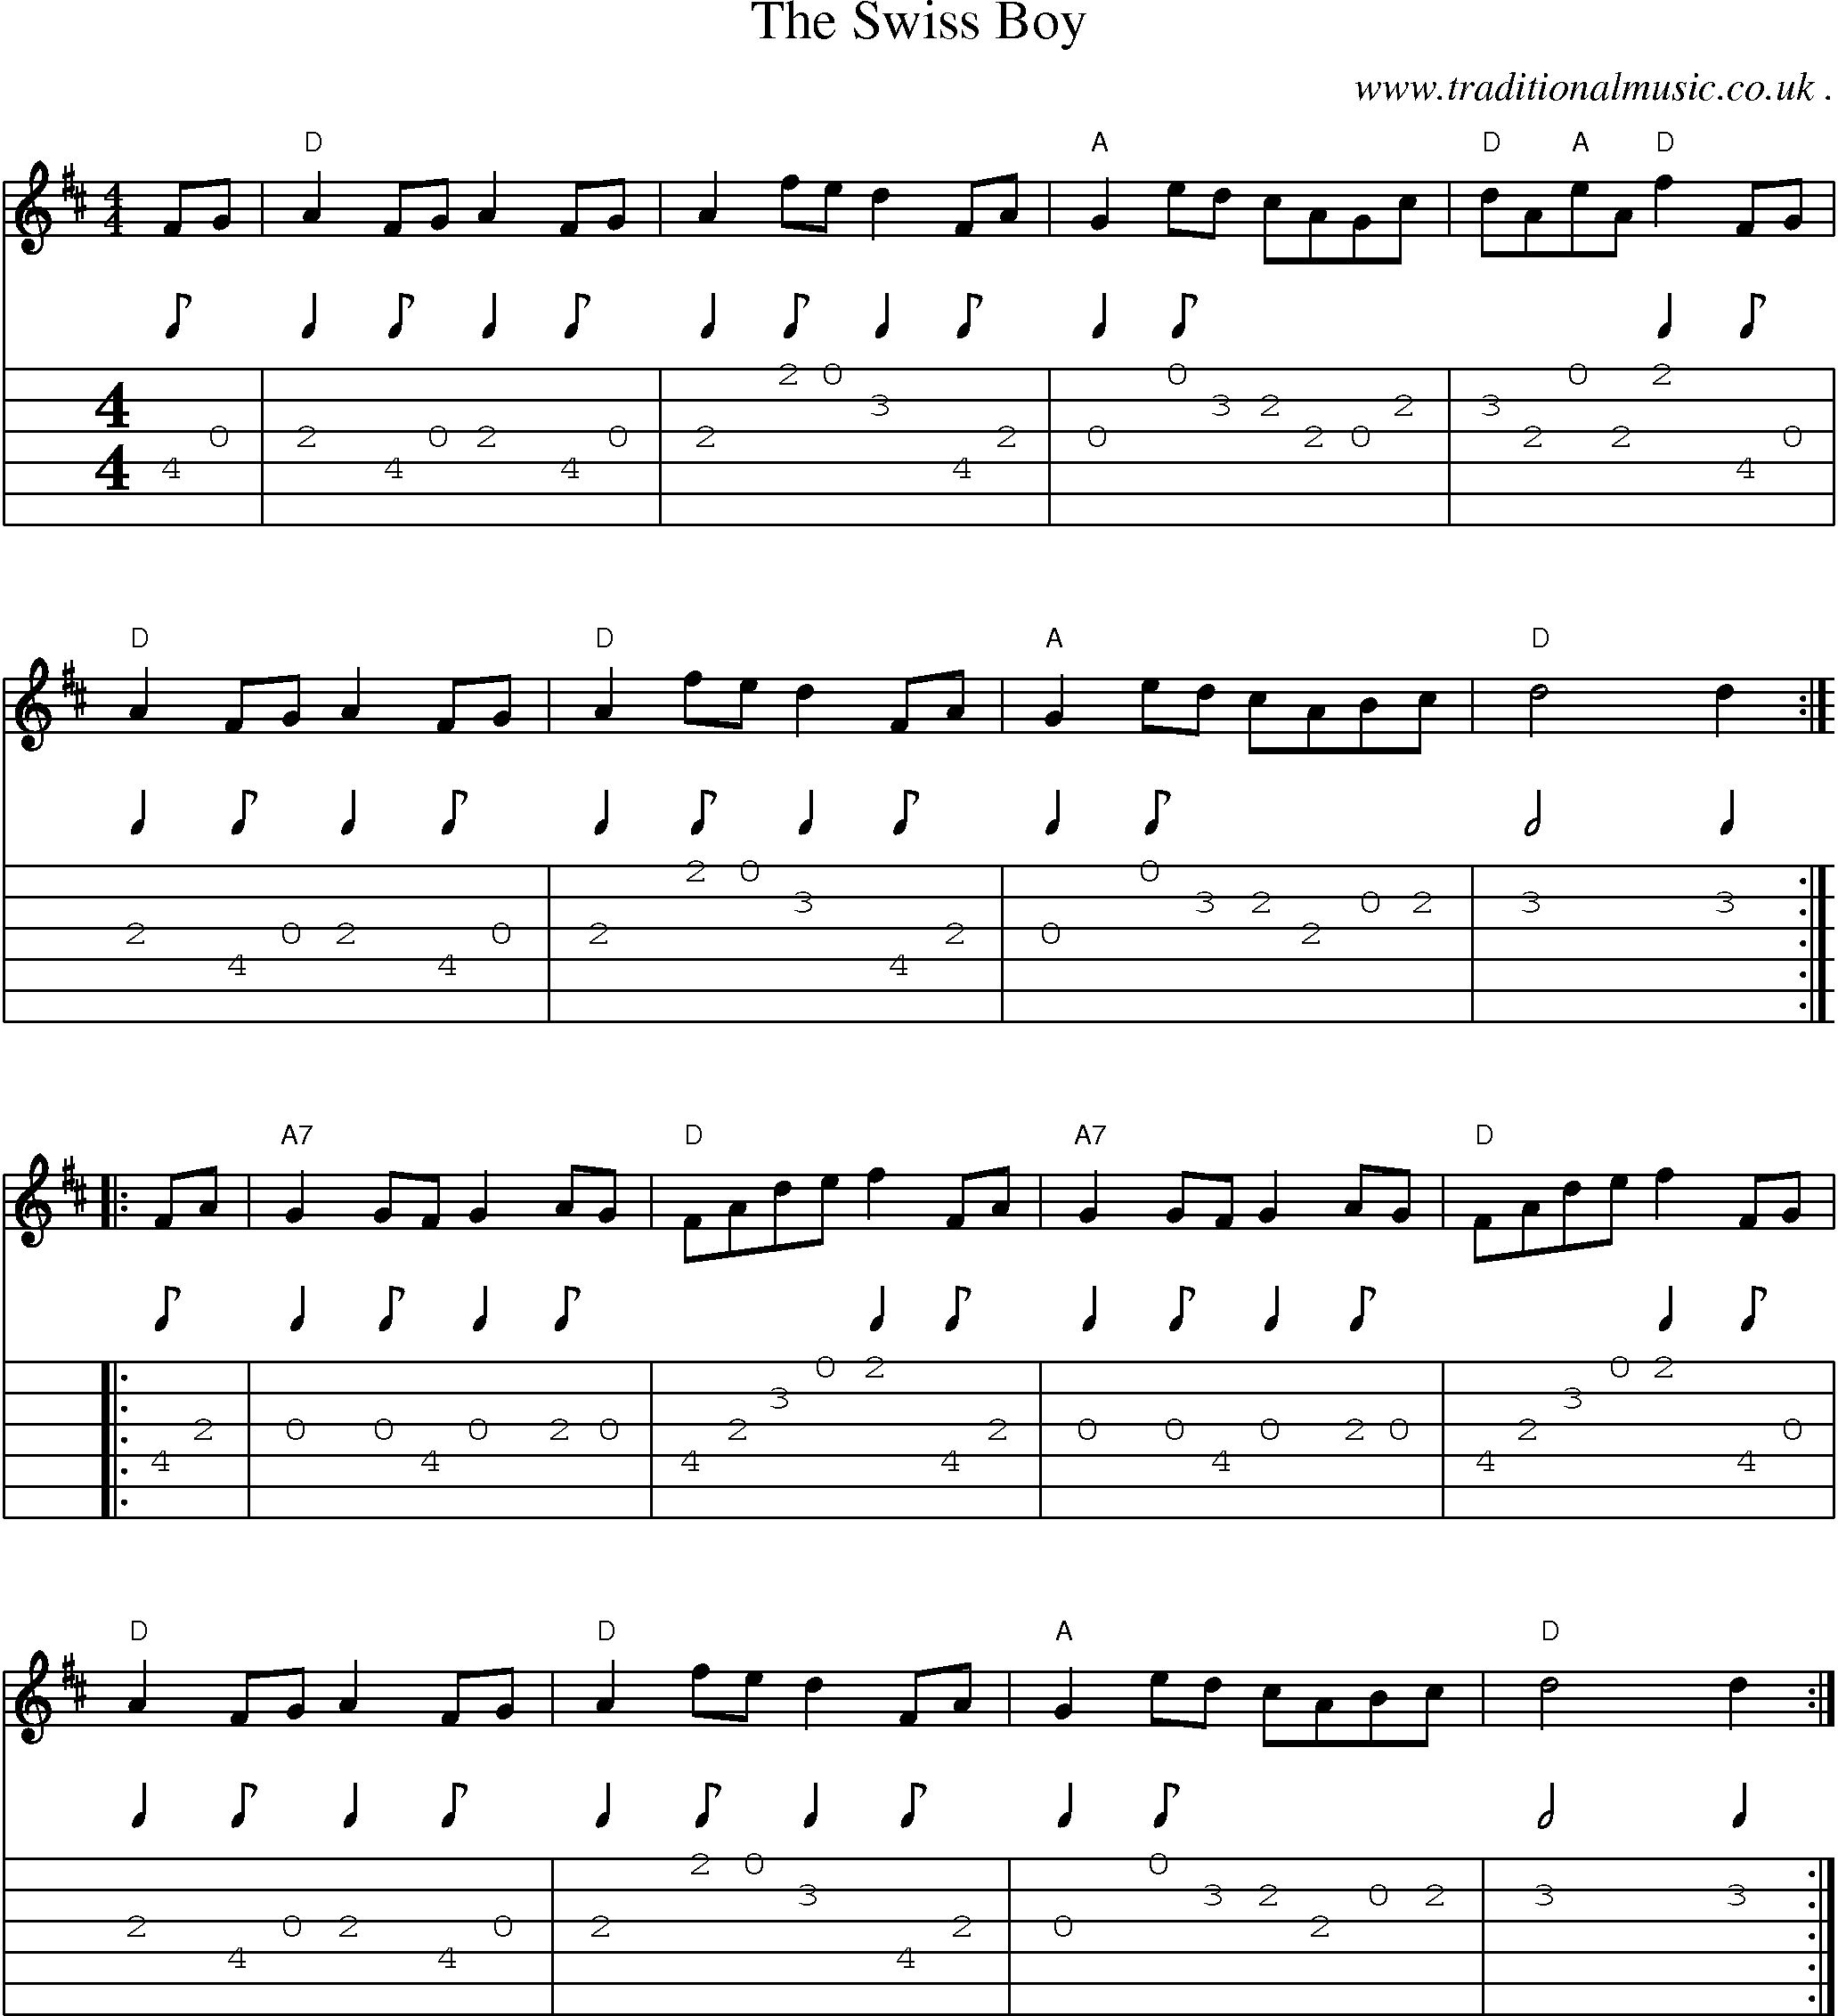 Sheet-Music and Guitar Tabs for The Swiss Boy